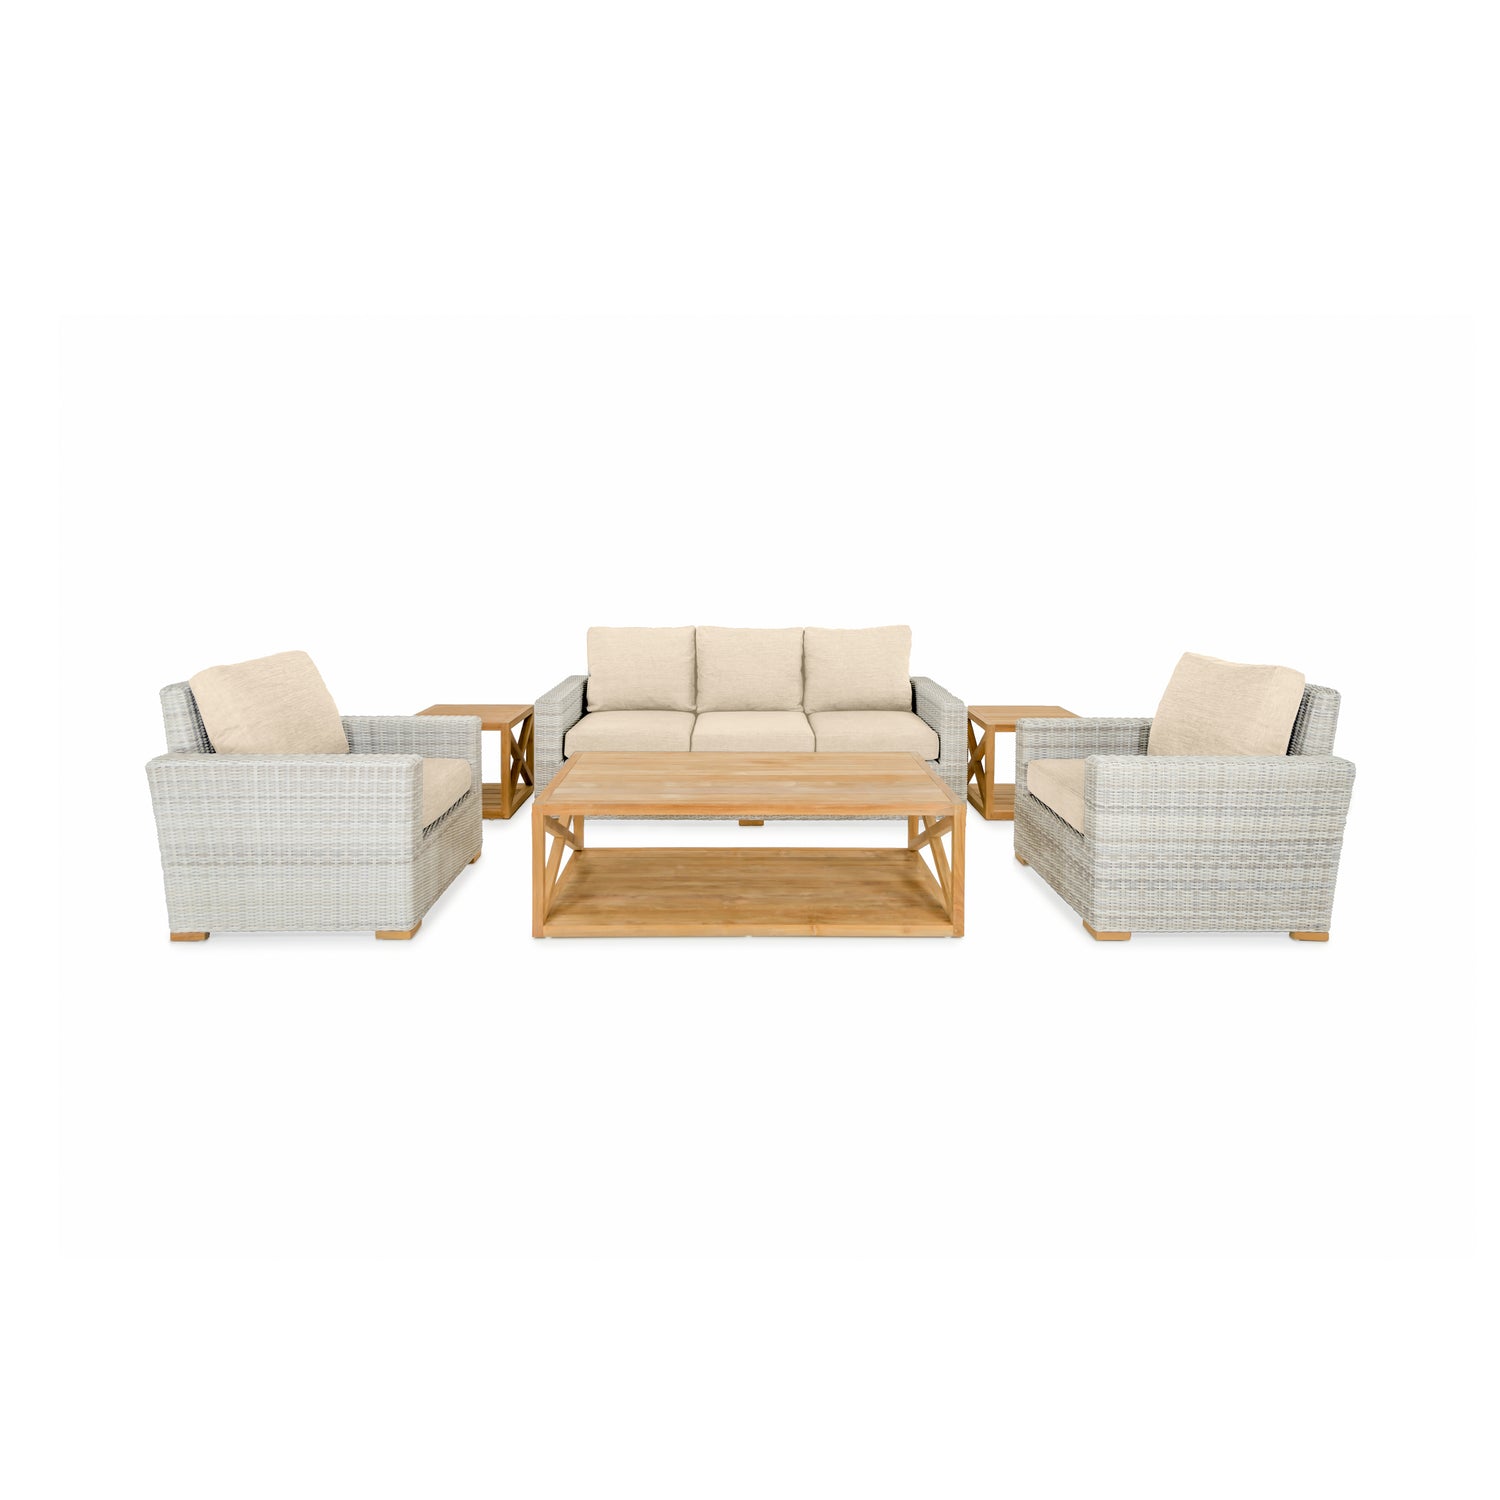 Oyster Bay Sofa/Clubs 6-Piece Lounge Set